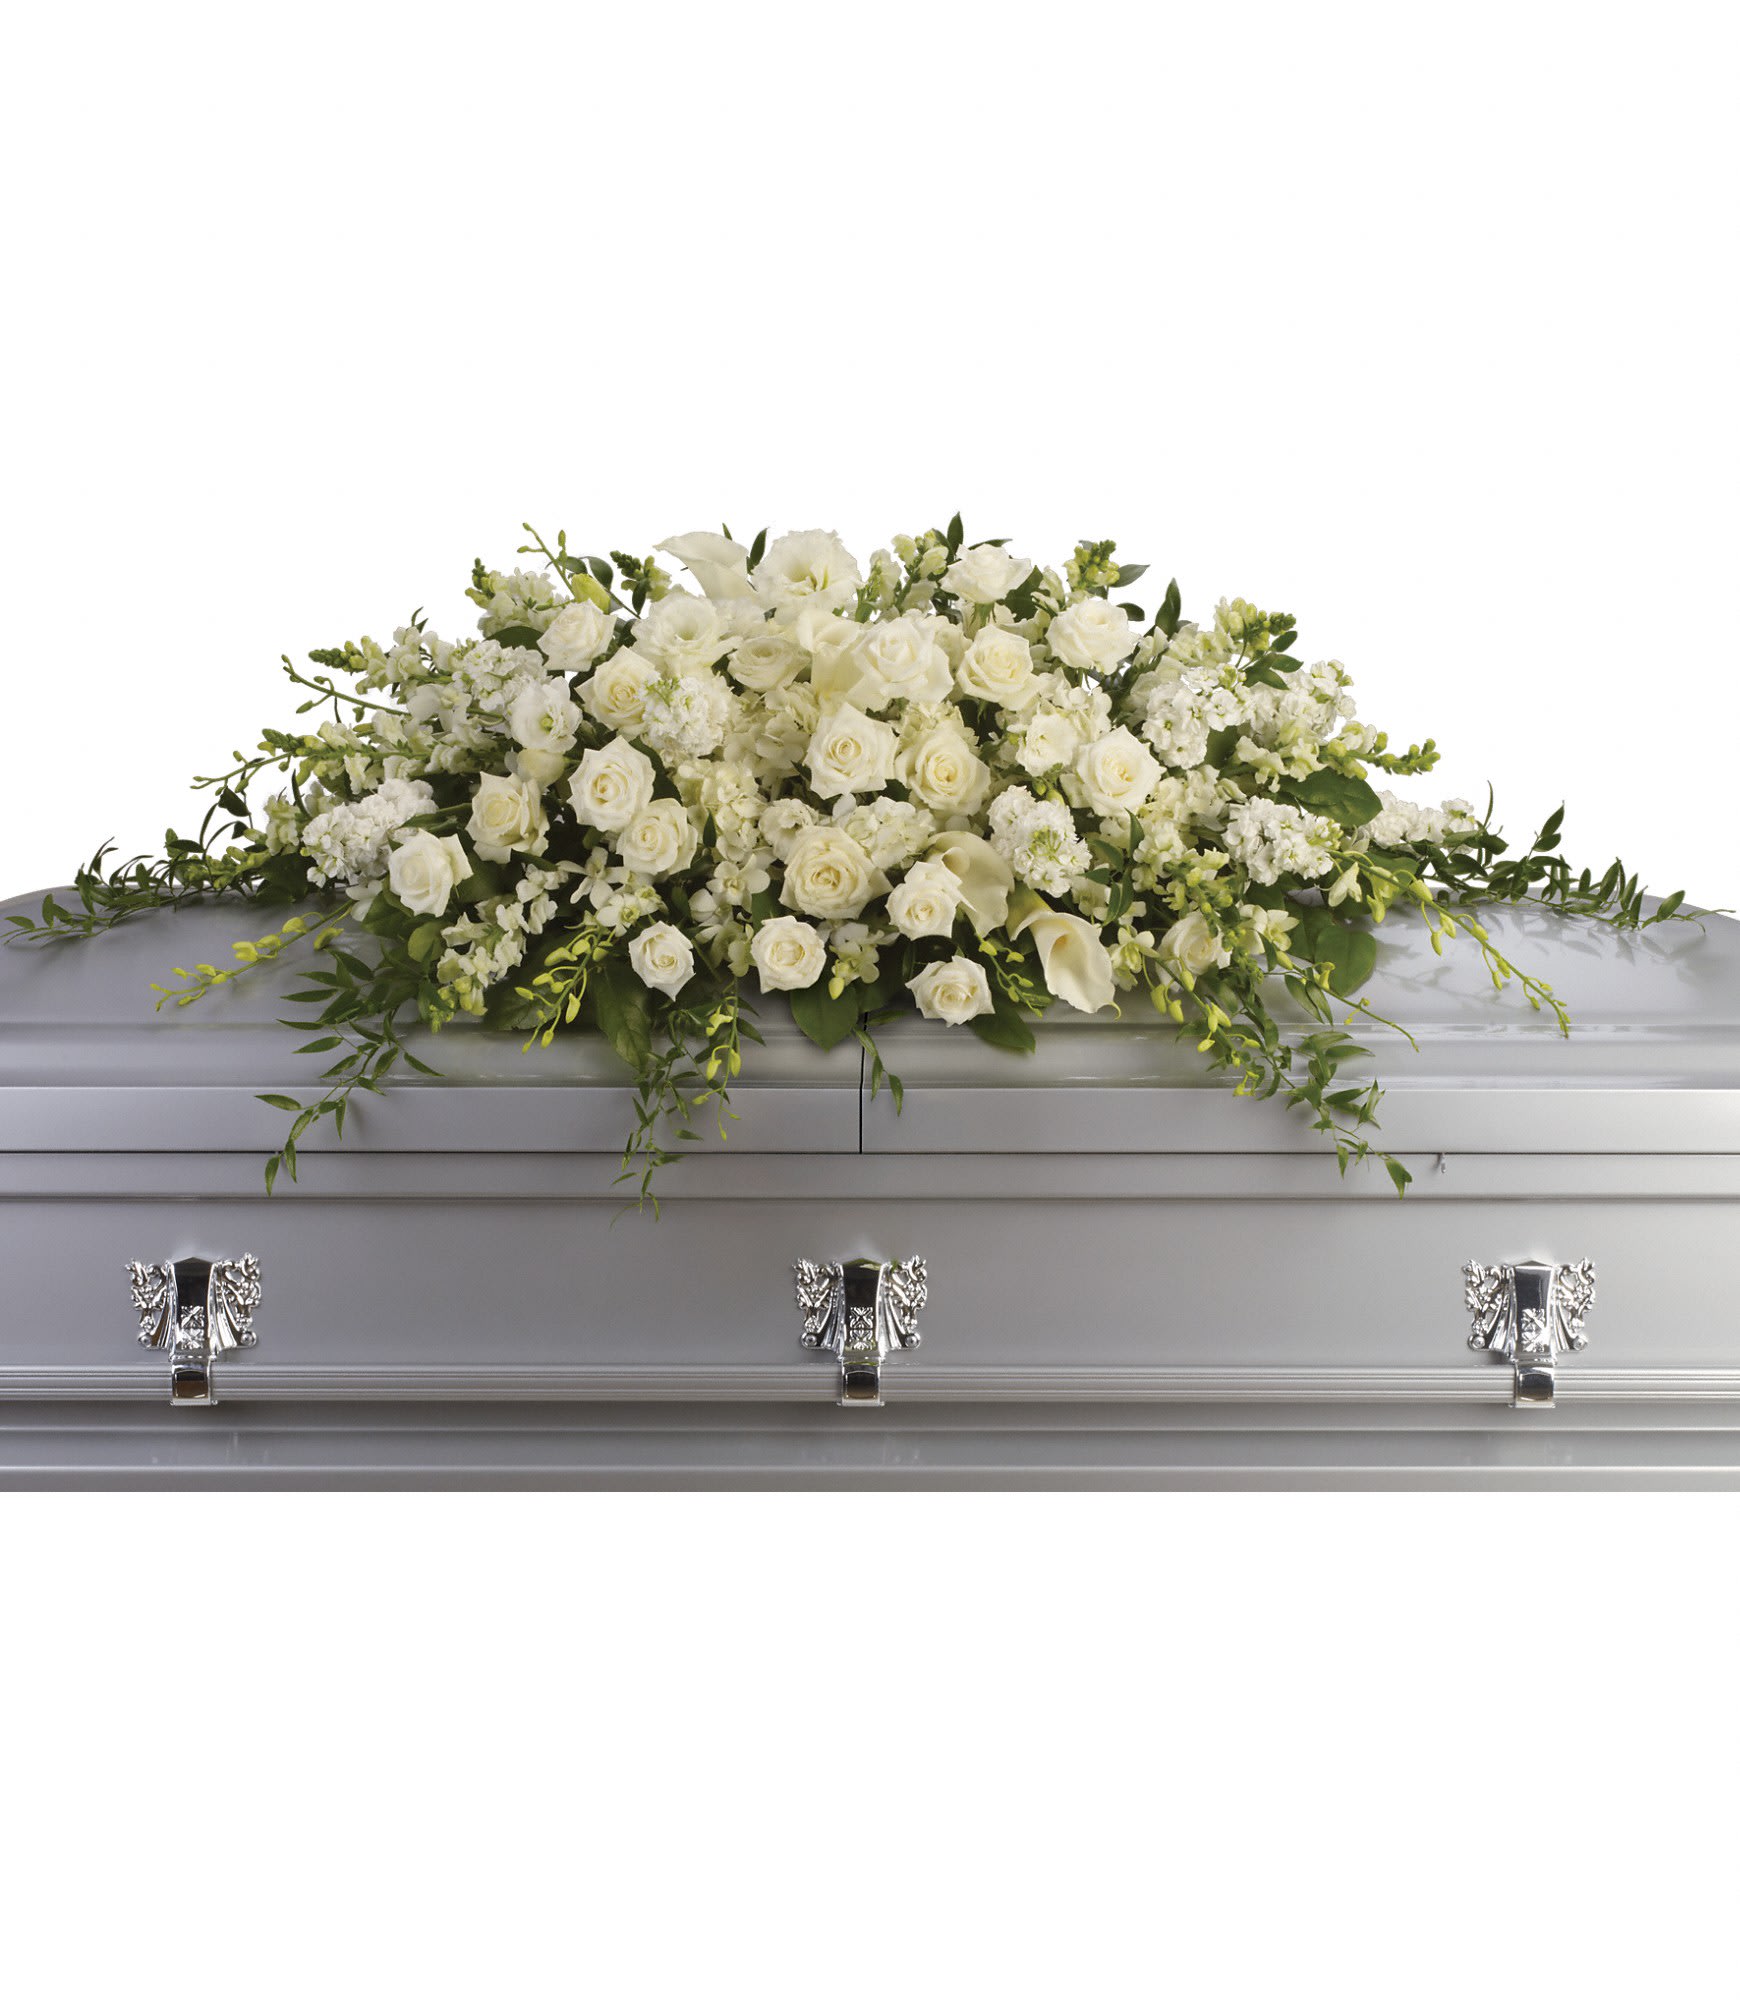 Purity and Peace Casket Spray by Teleflora - A stunning yet respectful testament in white, this spray for the casket includes roses, orchids, calla lilies and hydrangea accented by soft, trailing greens.  